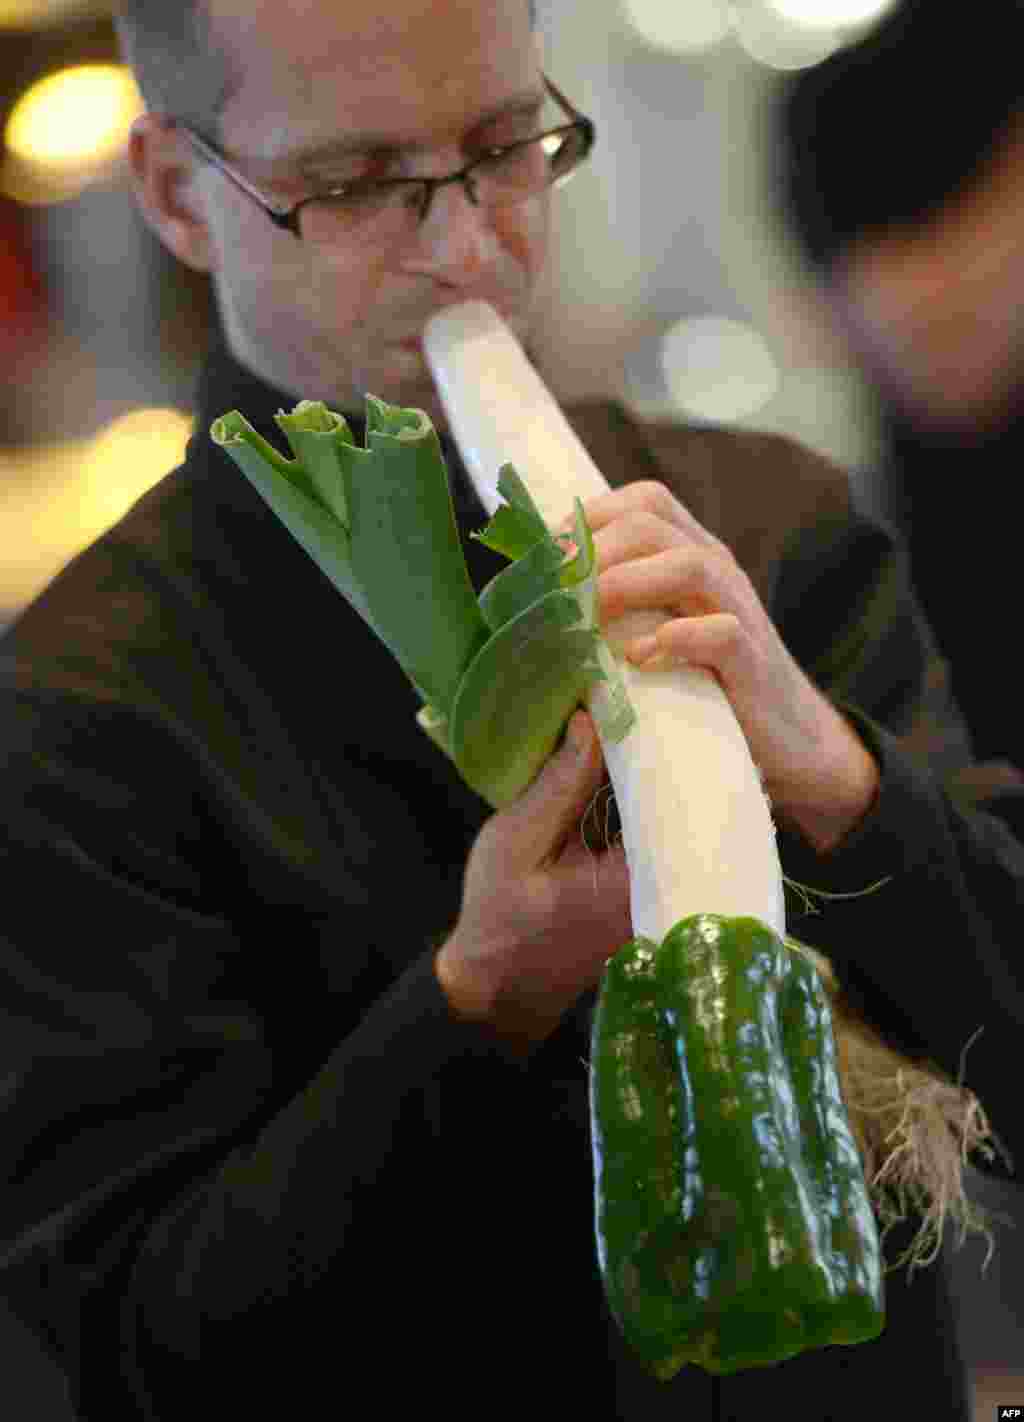 A musician of the Vienna Vegetable Orchestra who plays music exclusively with vegetable instruments (carrots and cucumbers instead of guitars and drums) prepares his instruments before a concert for the 100th anniversary of the San Miguel market in Madrid.